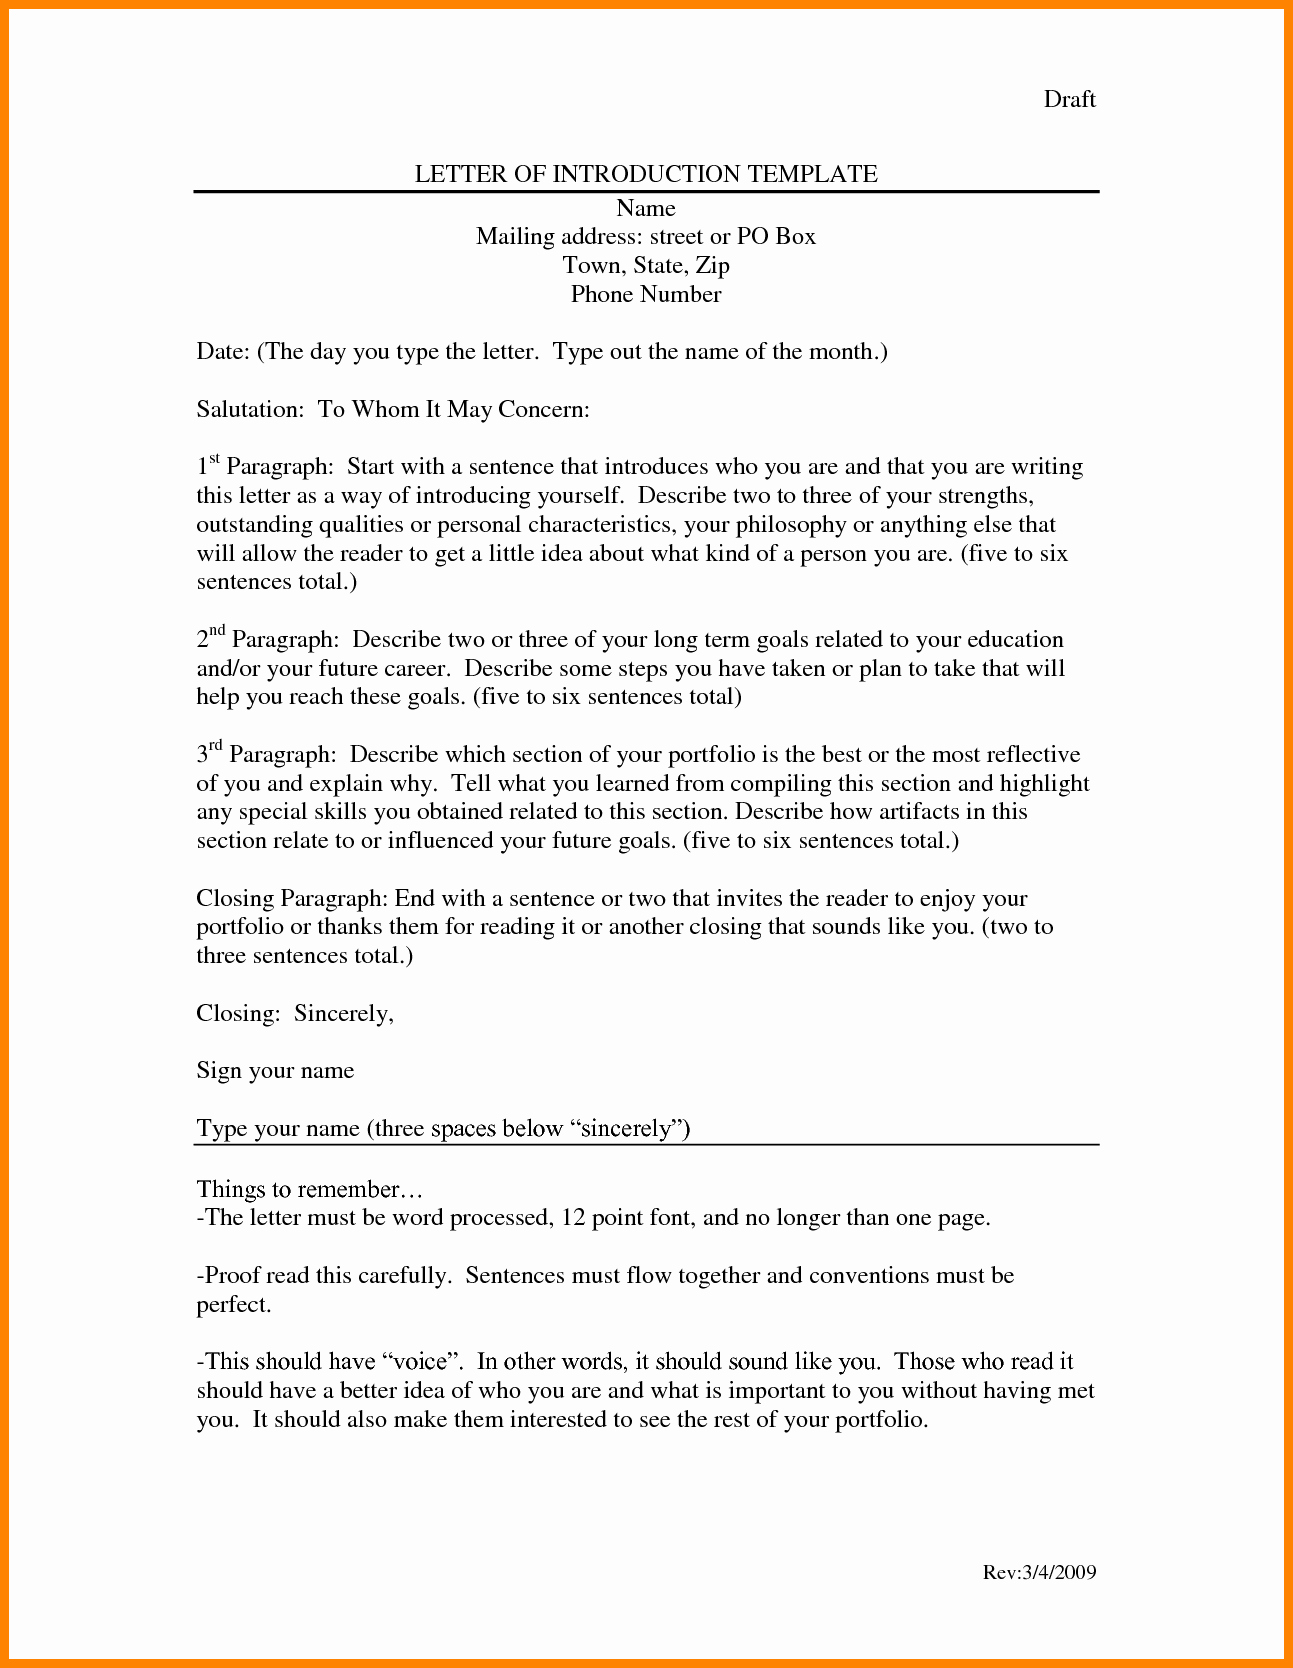 Letter Of Introduction Example Best Of 9 Introduction Letter to Colleagues